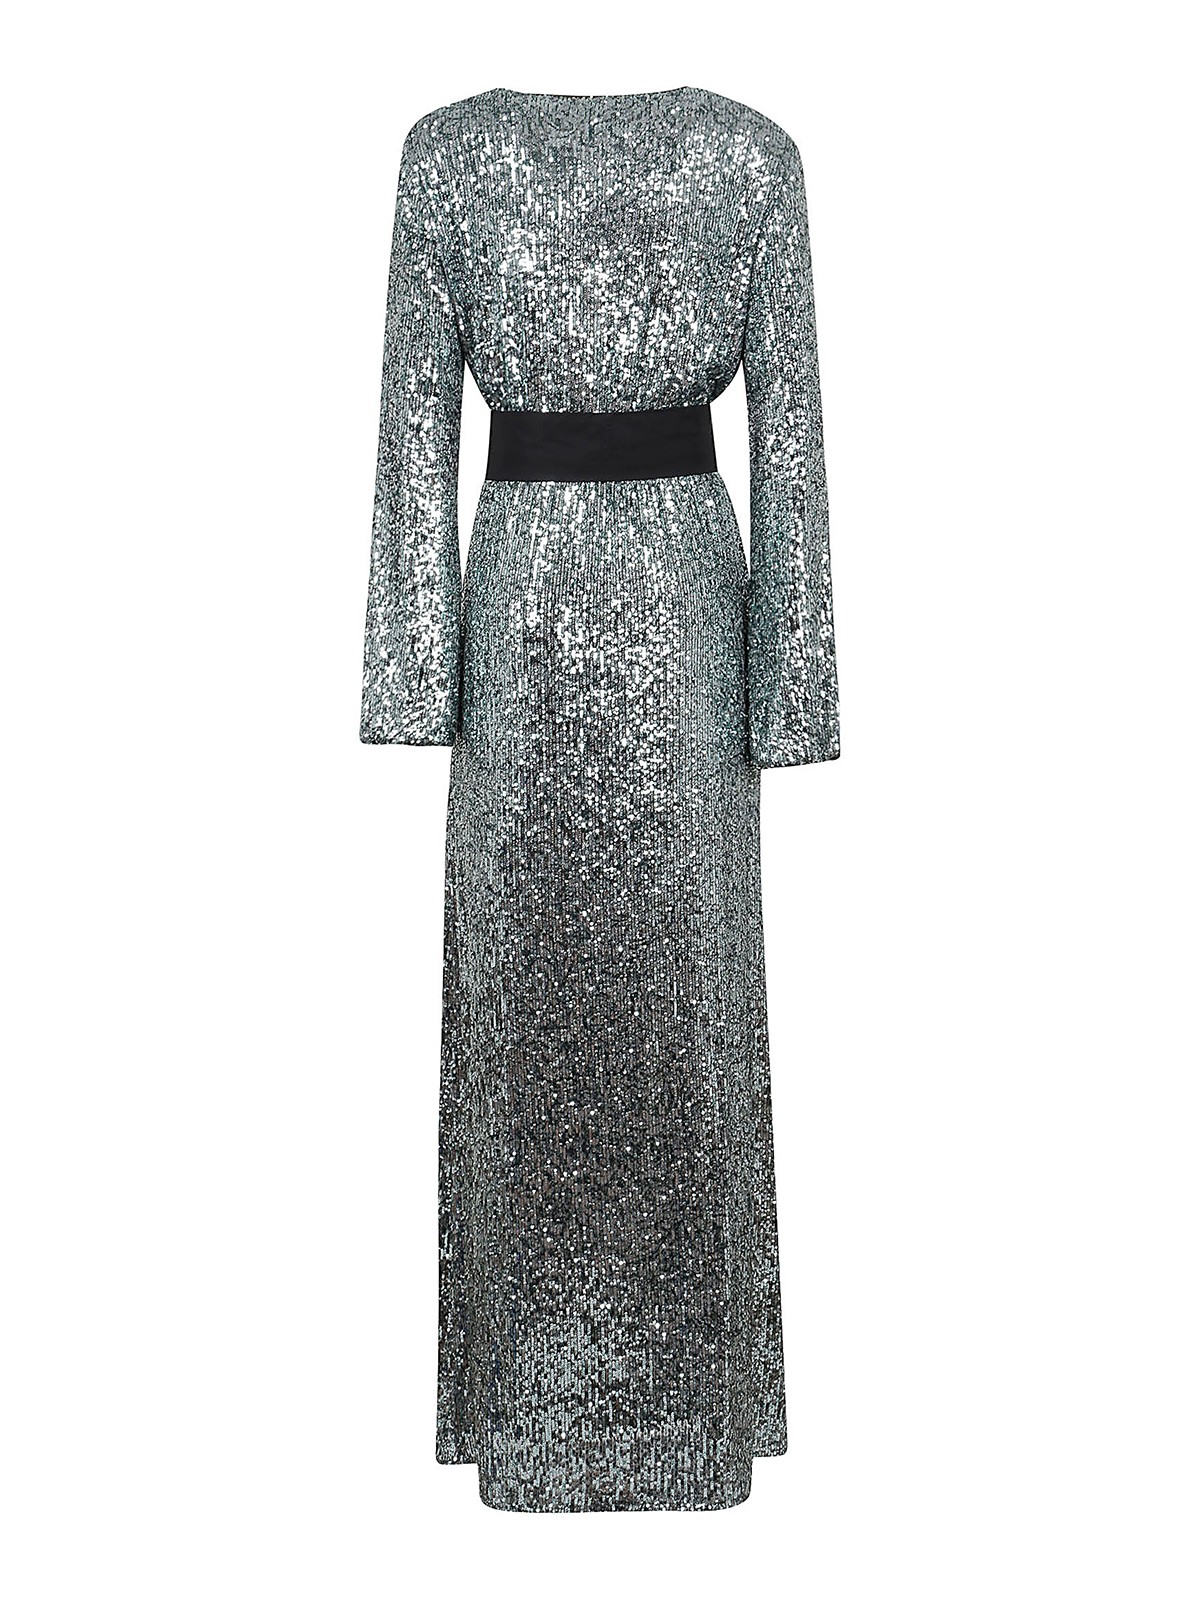 Evening dresses Pinko - Germanico 4 sequins gown dress - 1G18C0A099IS2